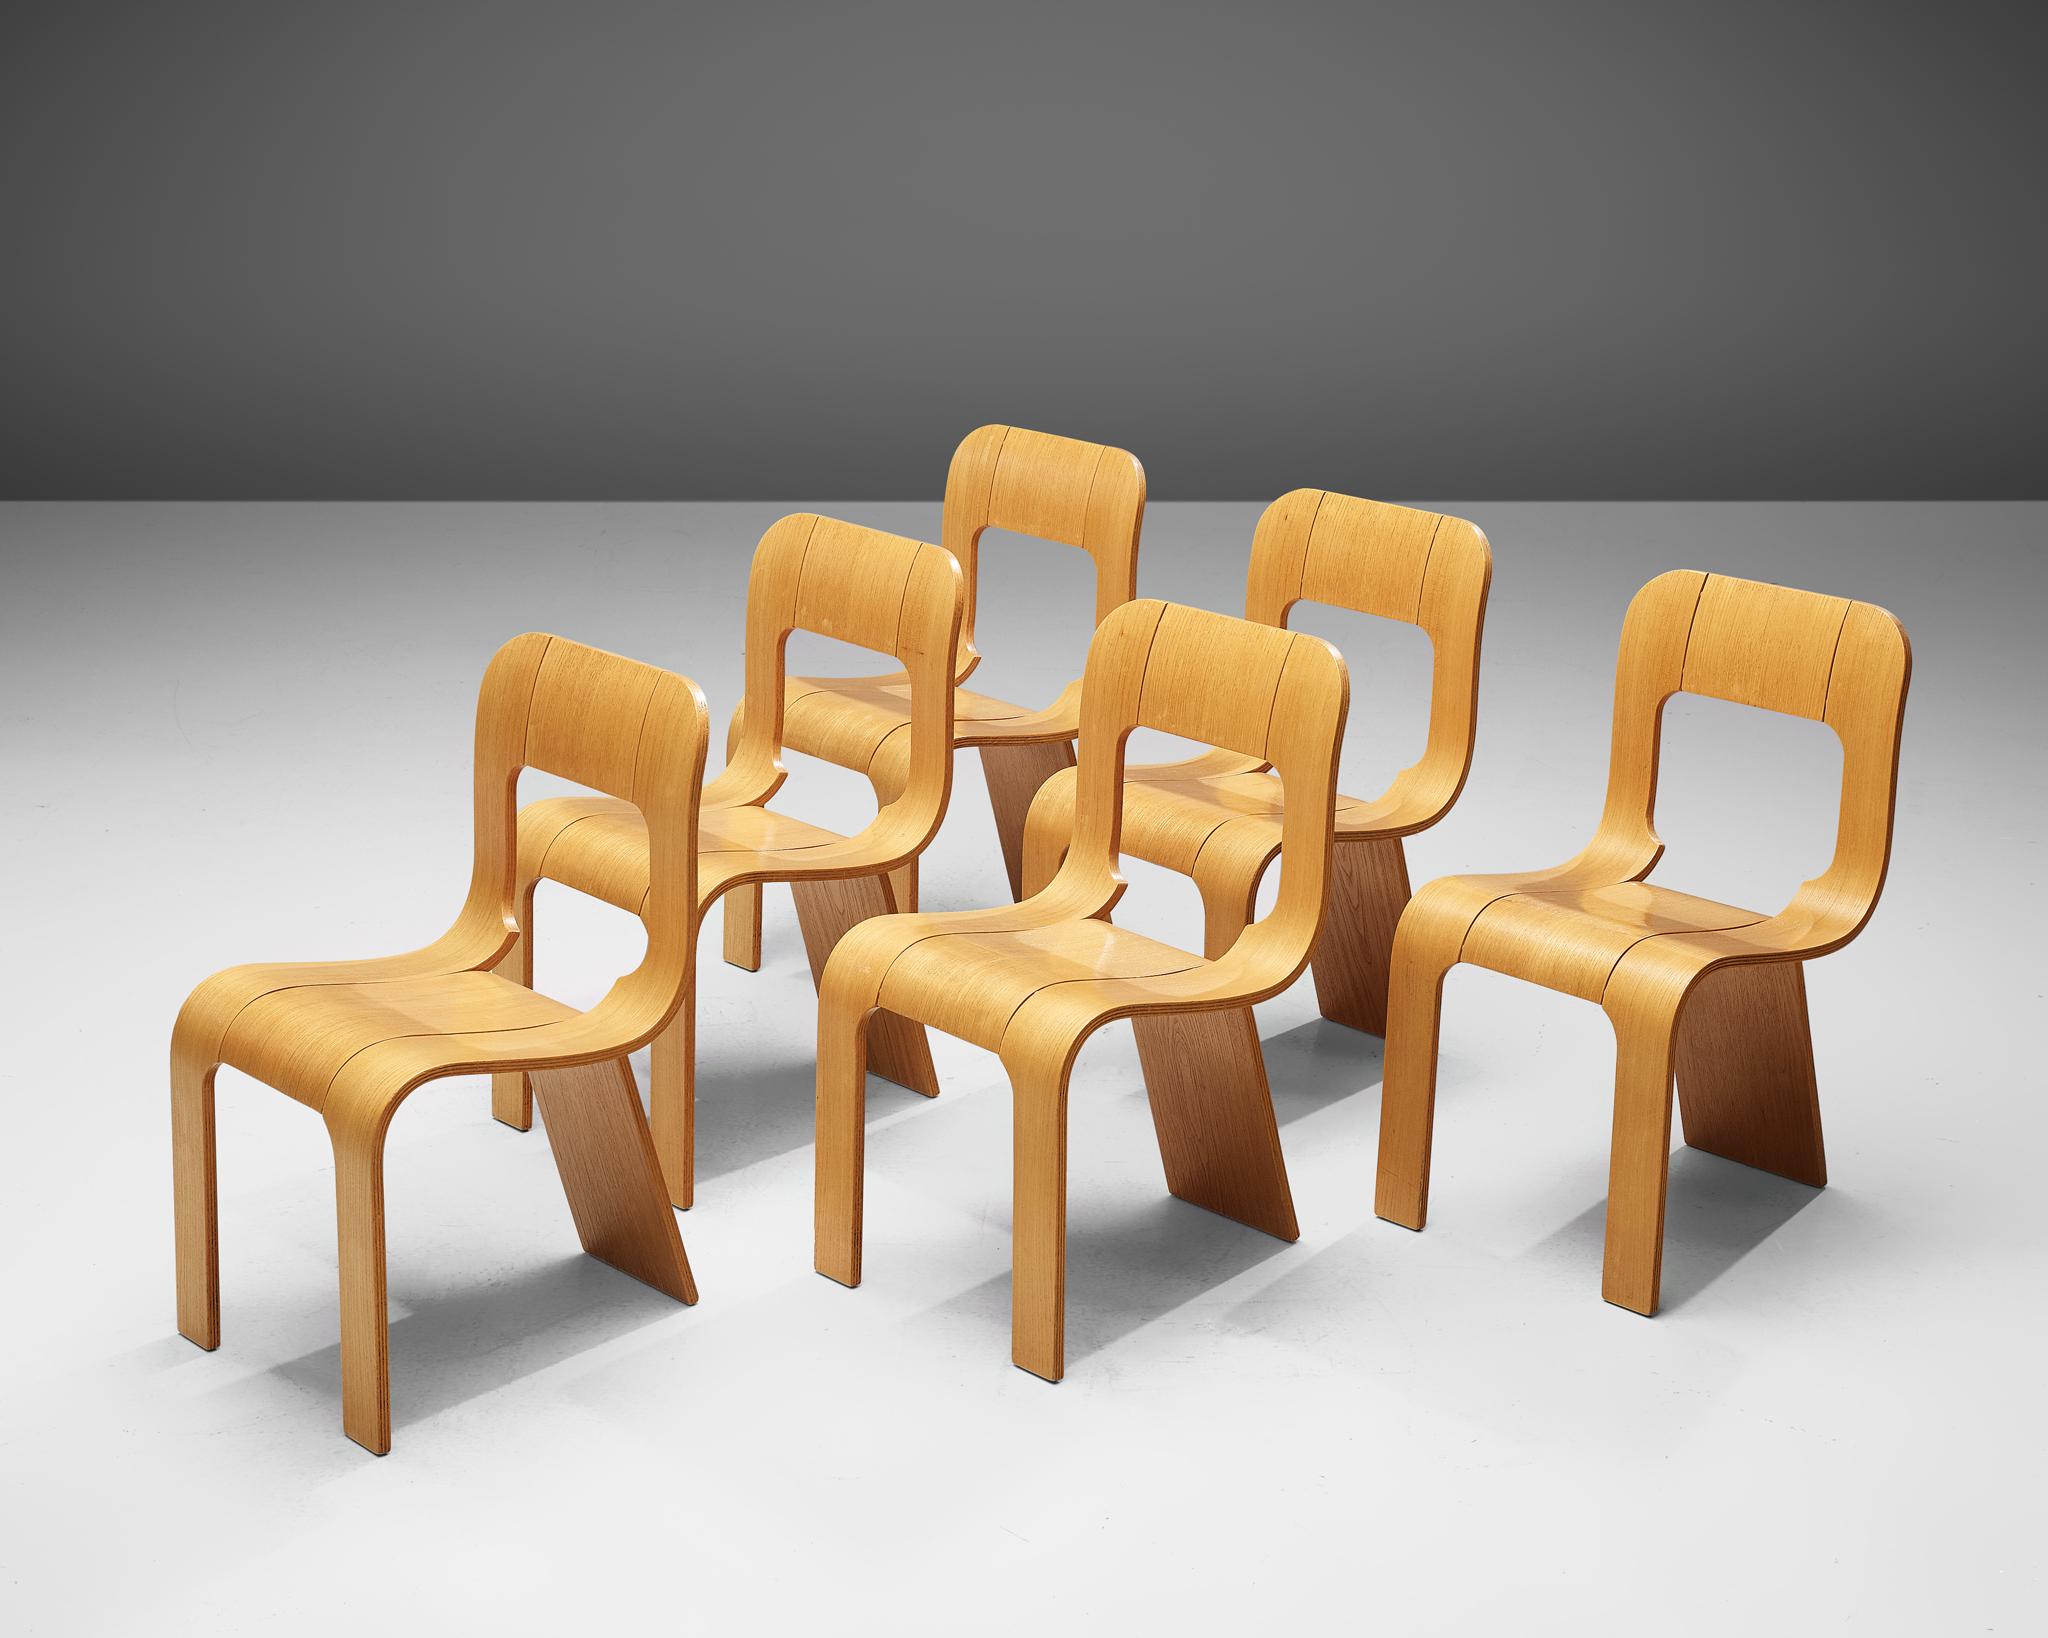 Gigi Sabadin for Stilwood, set of 6 dining chairs, ashwood and plywood, Italy, 1970s.

An inventive design by the Italian Gigi Sabadin, these chairs are made of bent plywood with ashwood veneer. The organic design seems to be made out of one